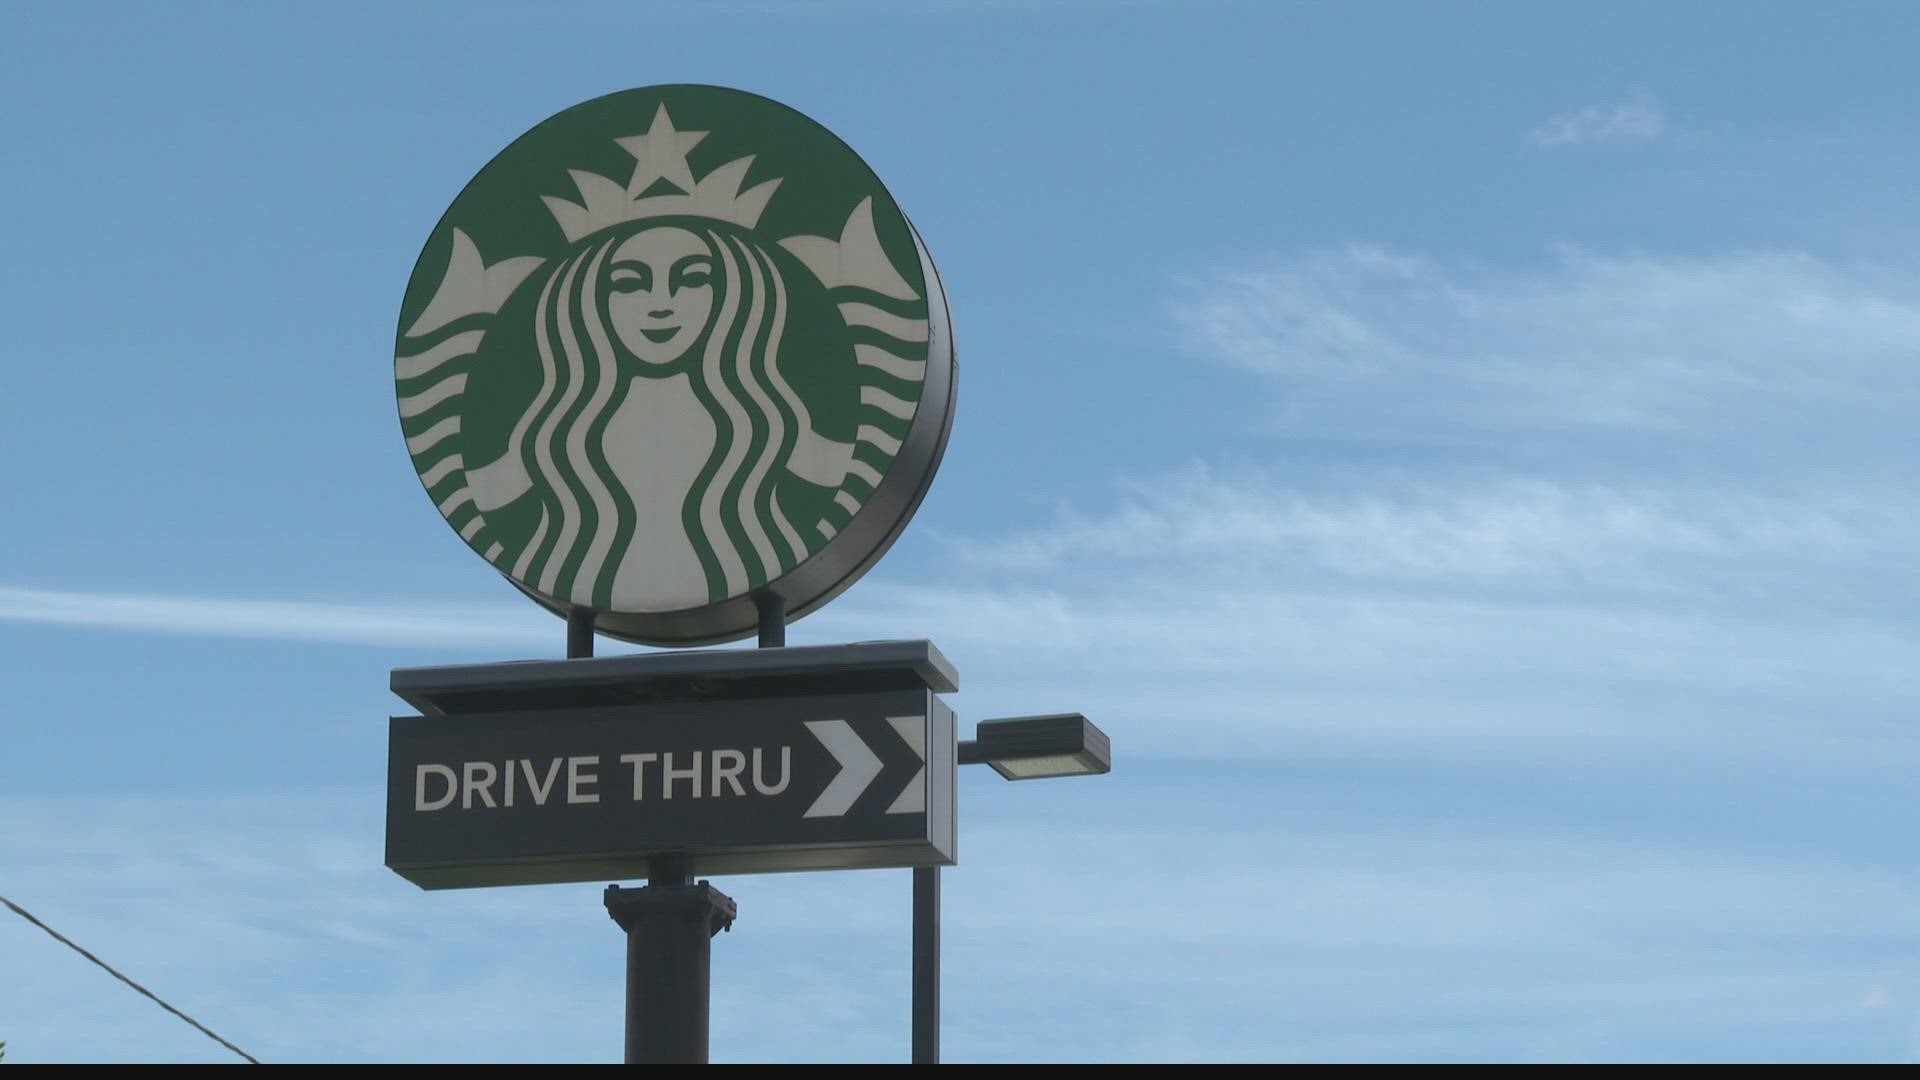 The Starbucks on Ricky Drive was one of the first three in the states to unionize. Employees say Starbucks has not recognized their union and is withholding raises.